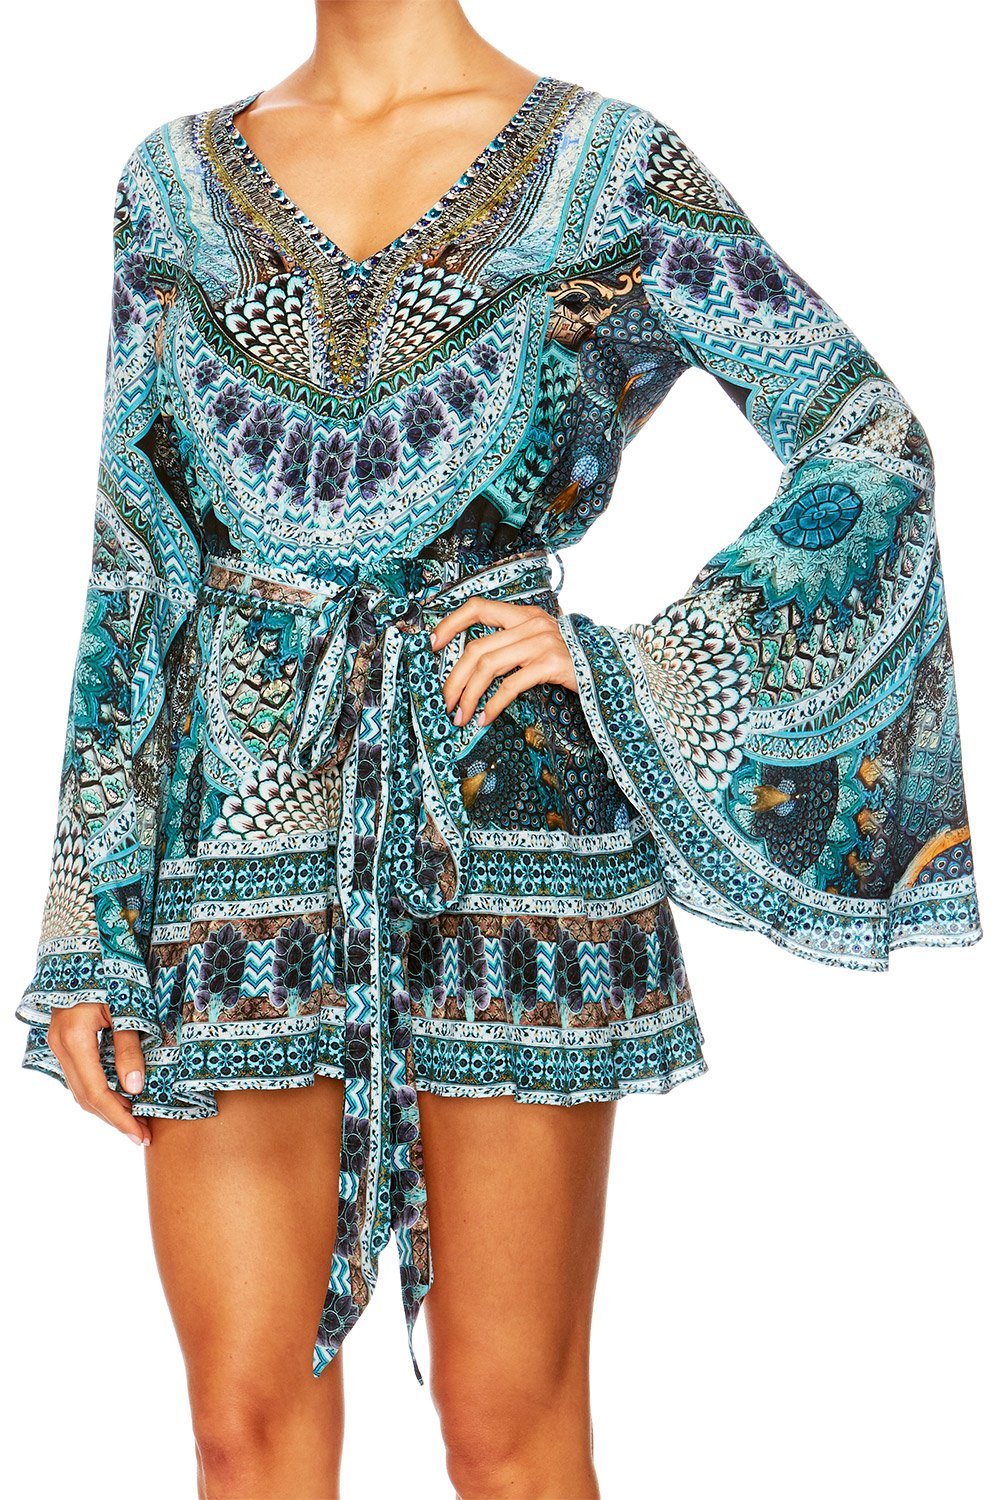 TURN ON THE CHARM WIDE SLEEVE PLAYSUIT